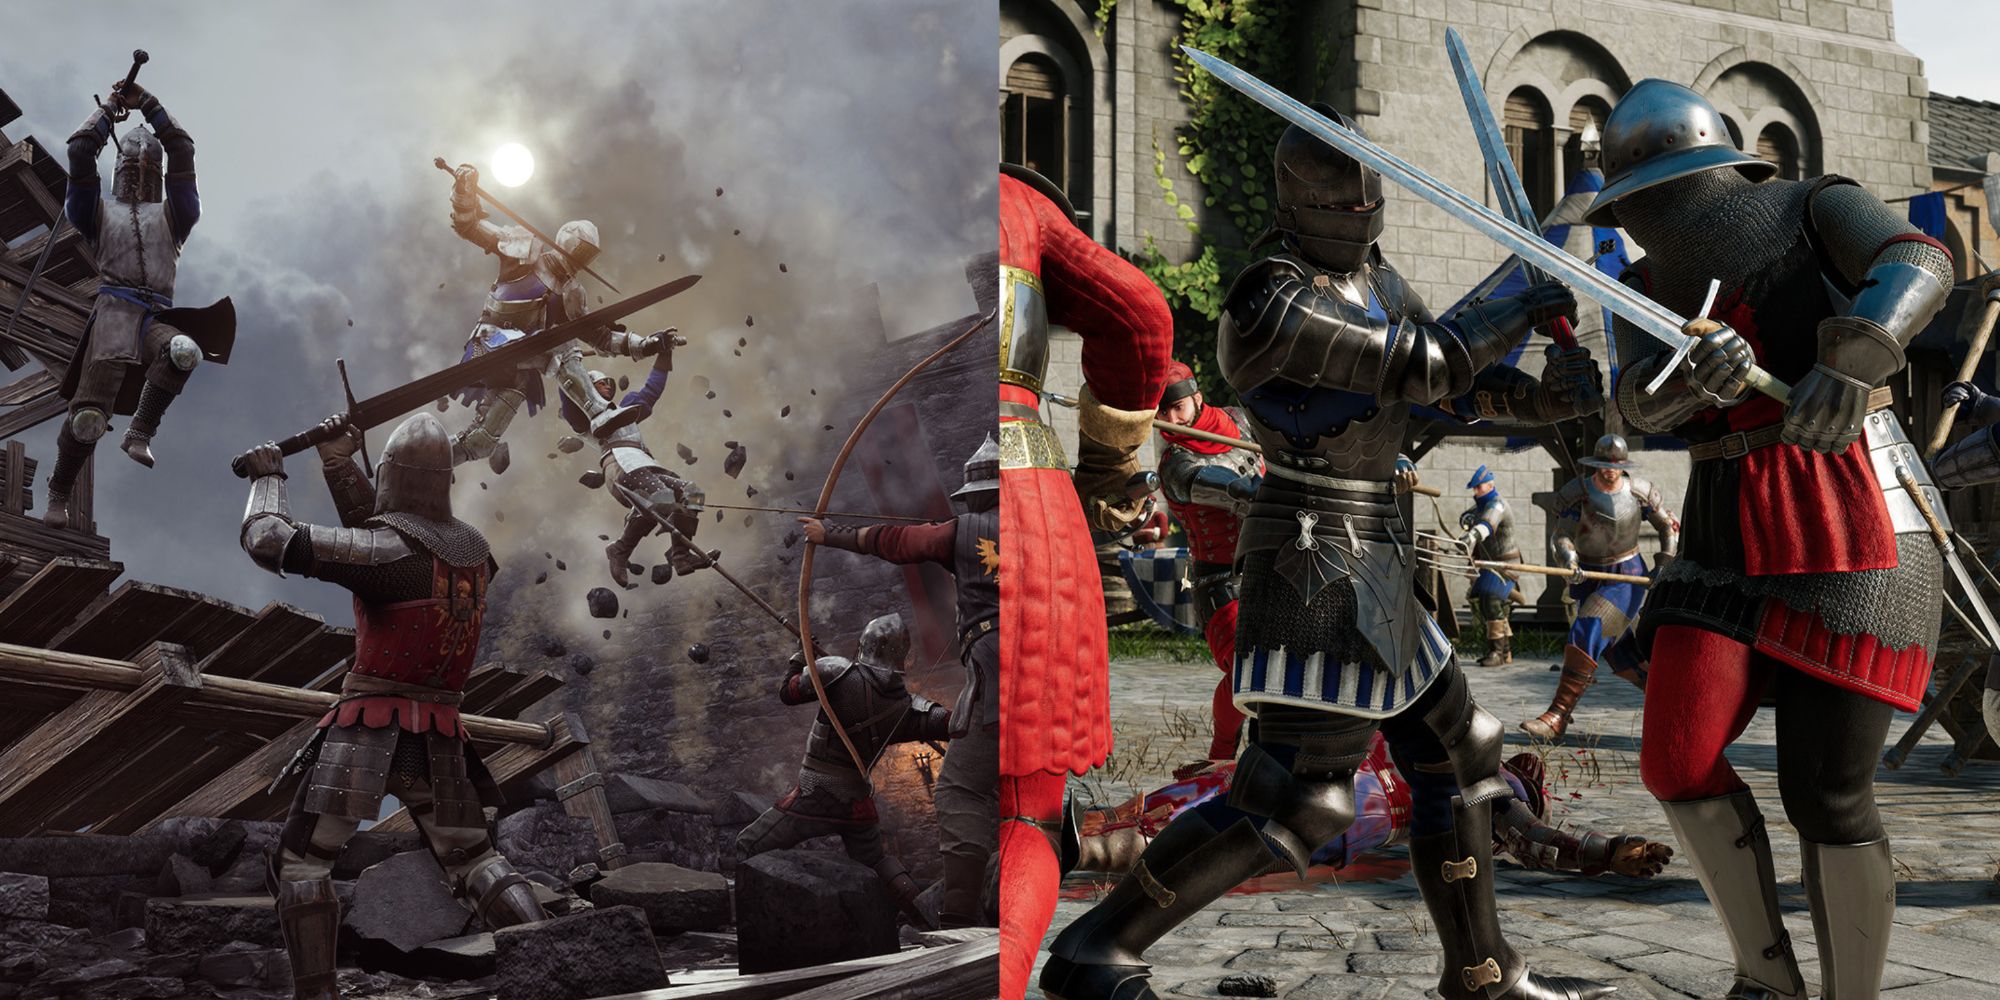 A split image showing combat scenes from both Chivalry 2 and Morhau, featuring knights wielding swords.